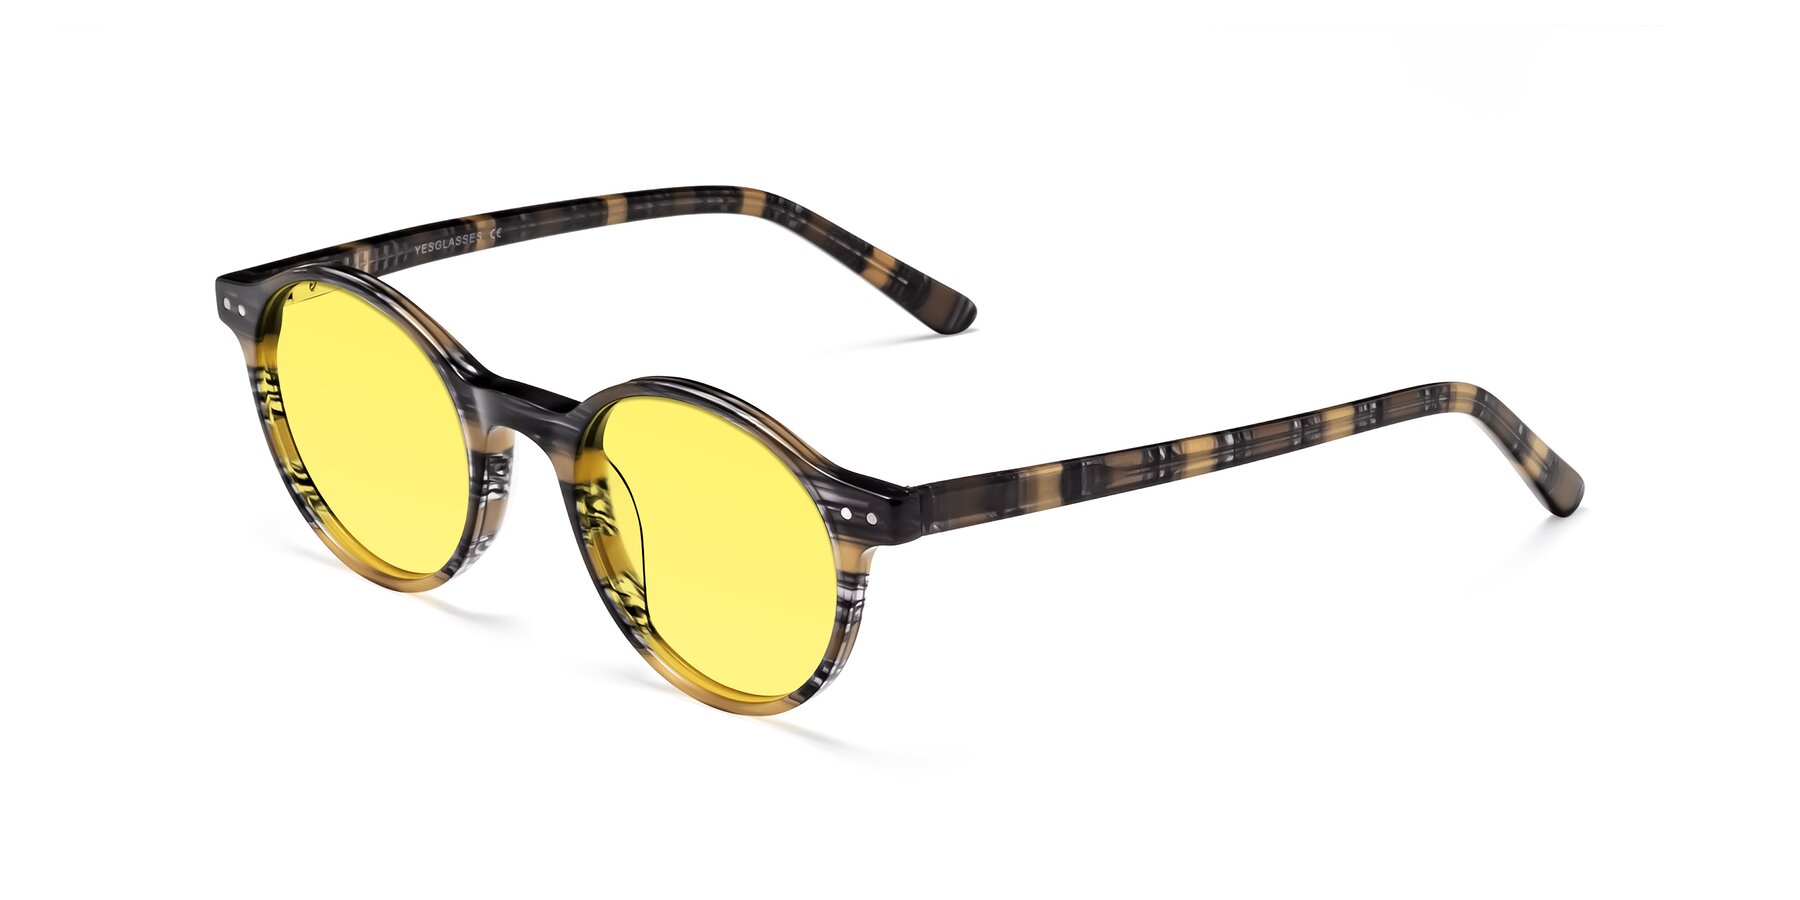 Angle of Jardi in Stripe Yellow Grey with Medium Yellow Tinted Lenses